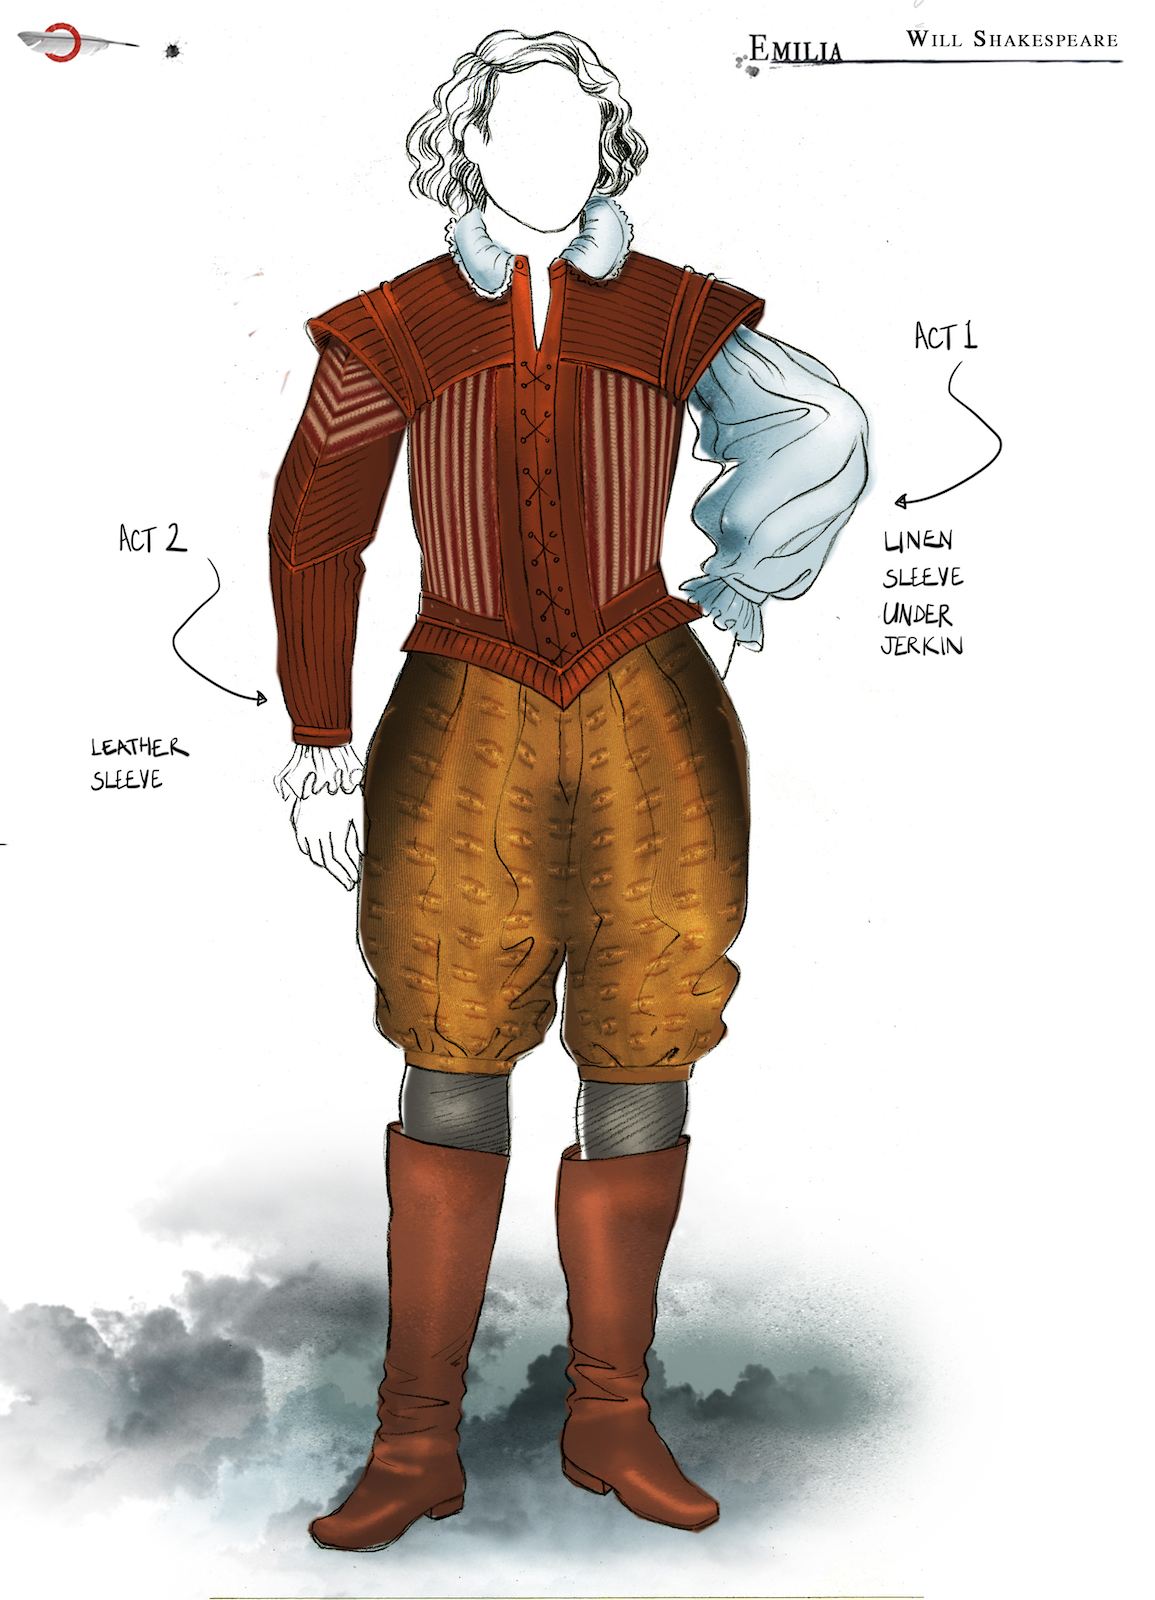 A costume sketch of a male Elizabethan outfit with linen puffed sleeves